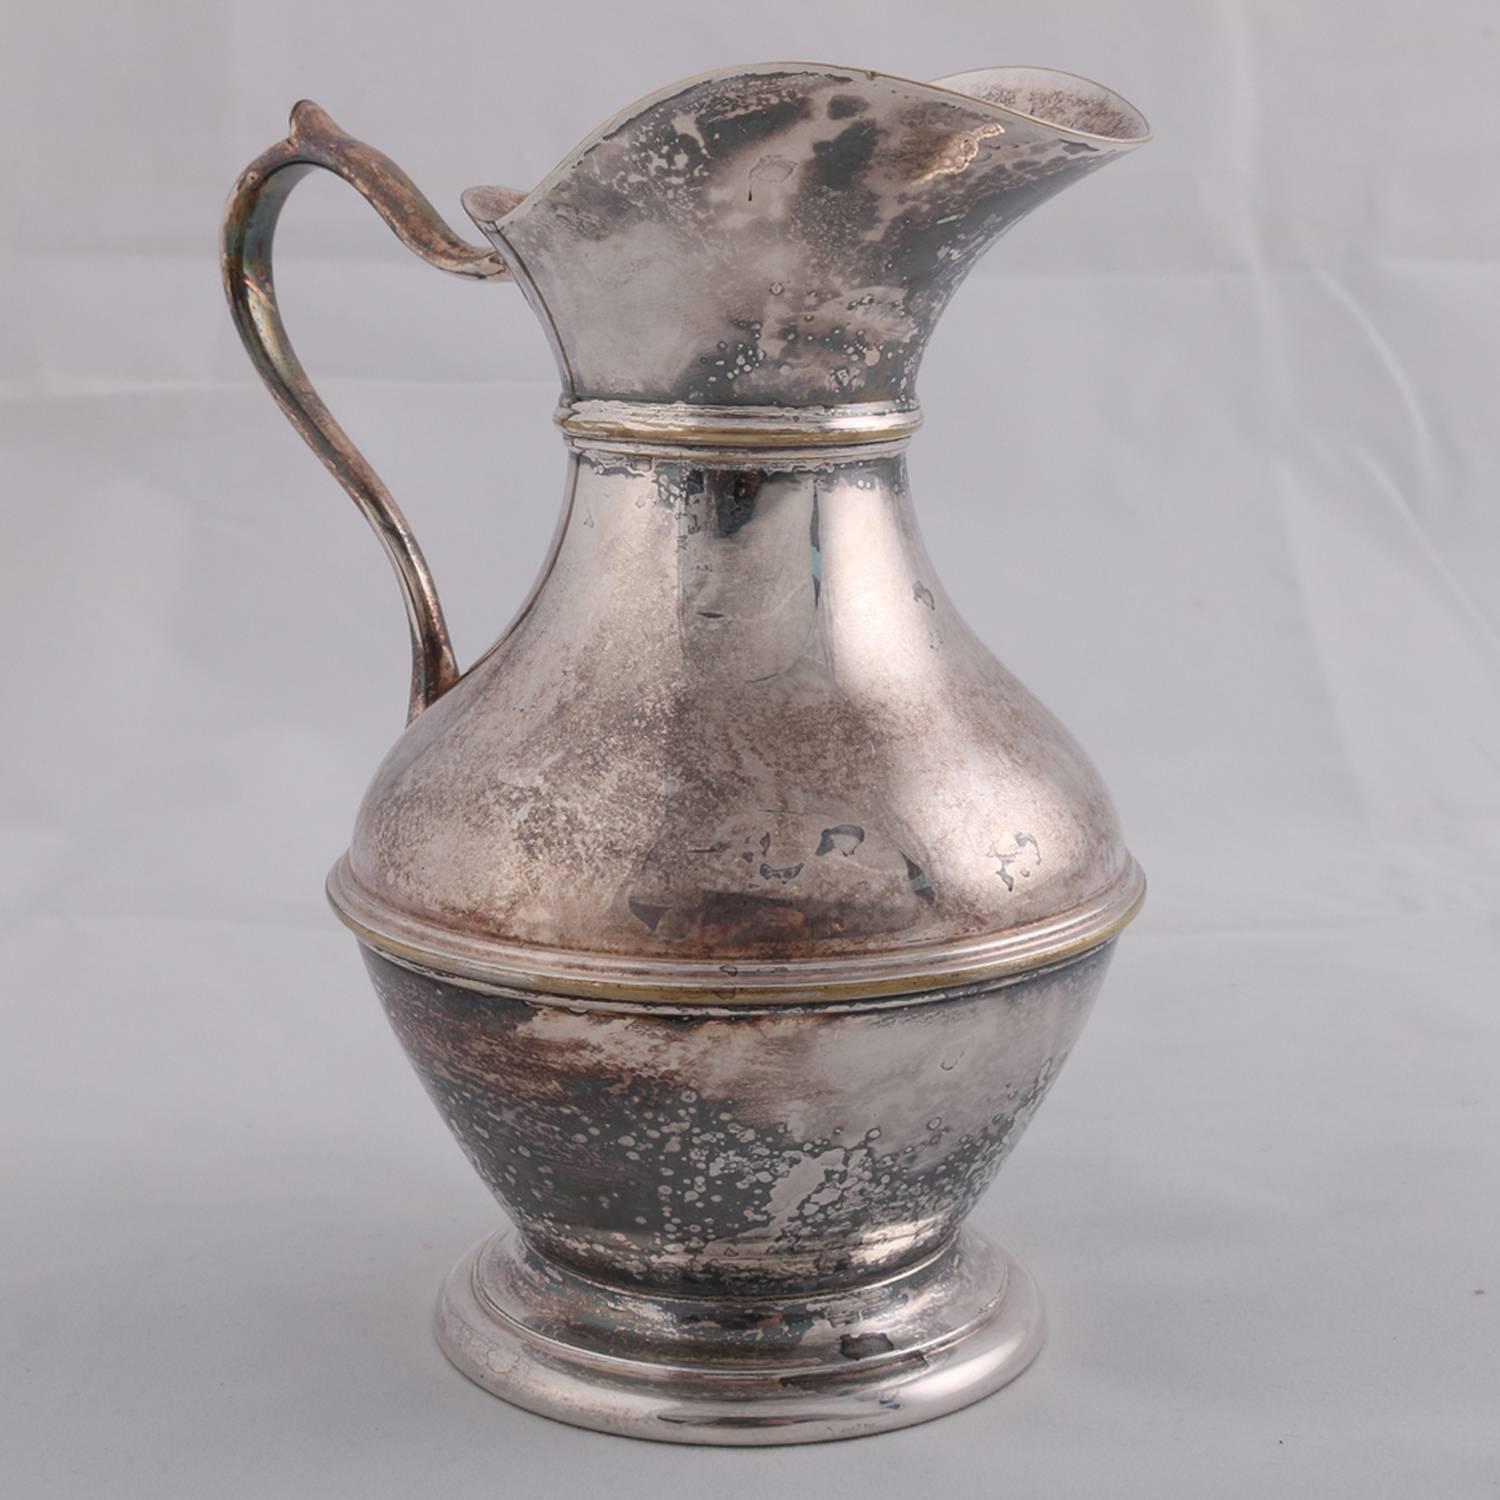 German sterling silver hallmarked Georgian style pitcher features hourglass form with scroll handle, touch marks on base include rampant lion, possibly Darmstadt, 9.4 toz, 19th century
 

Measures: 6.5